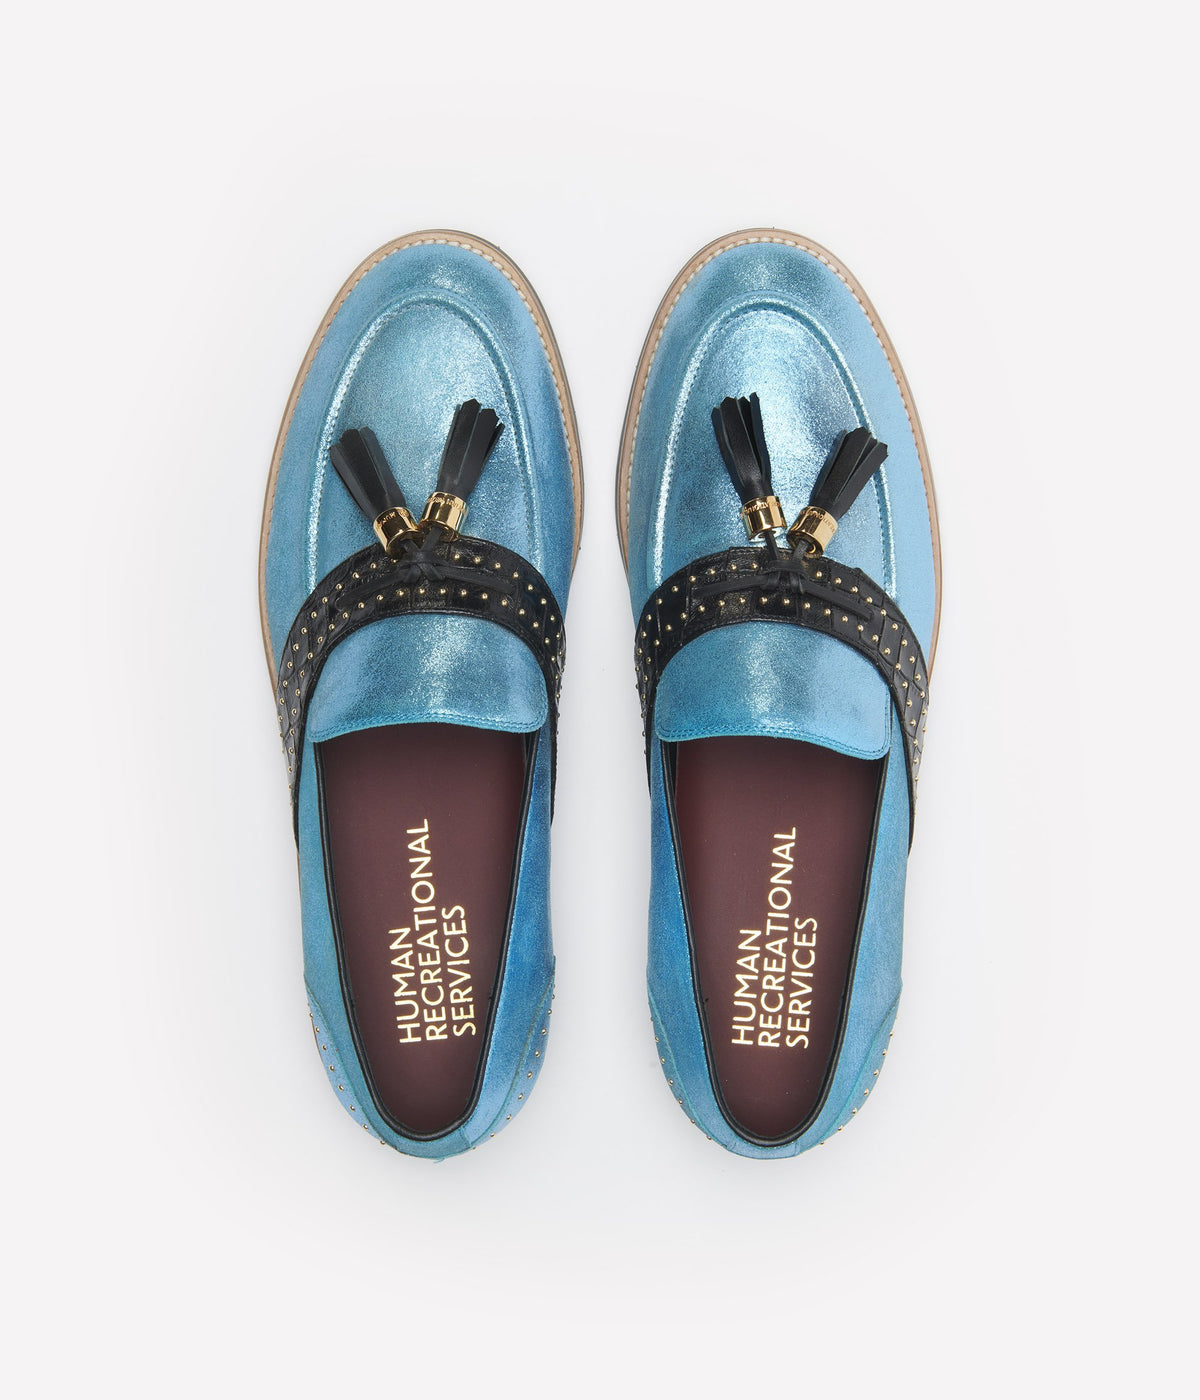 HUMAN RECREATIONAL SERVICES DEL REY TASSEL LOAFER IN LIGHT BLUE WITH EMBOSSED CROCODILE CALFSKIN